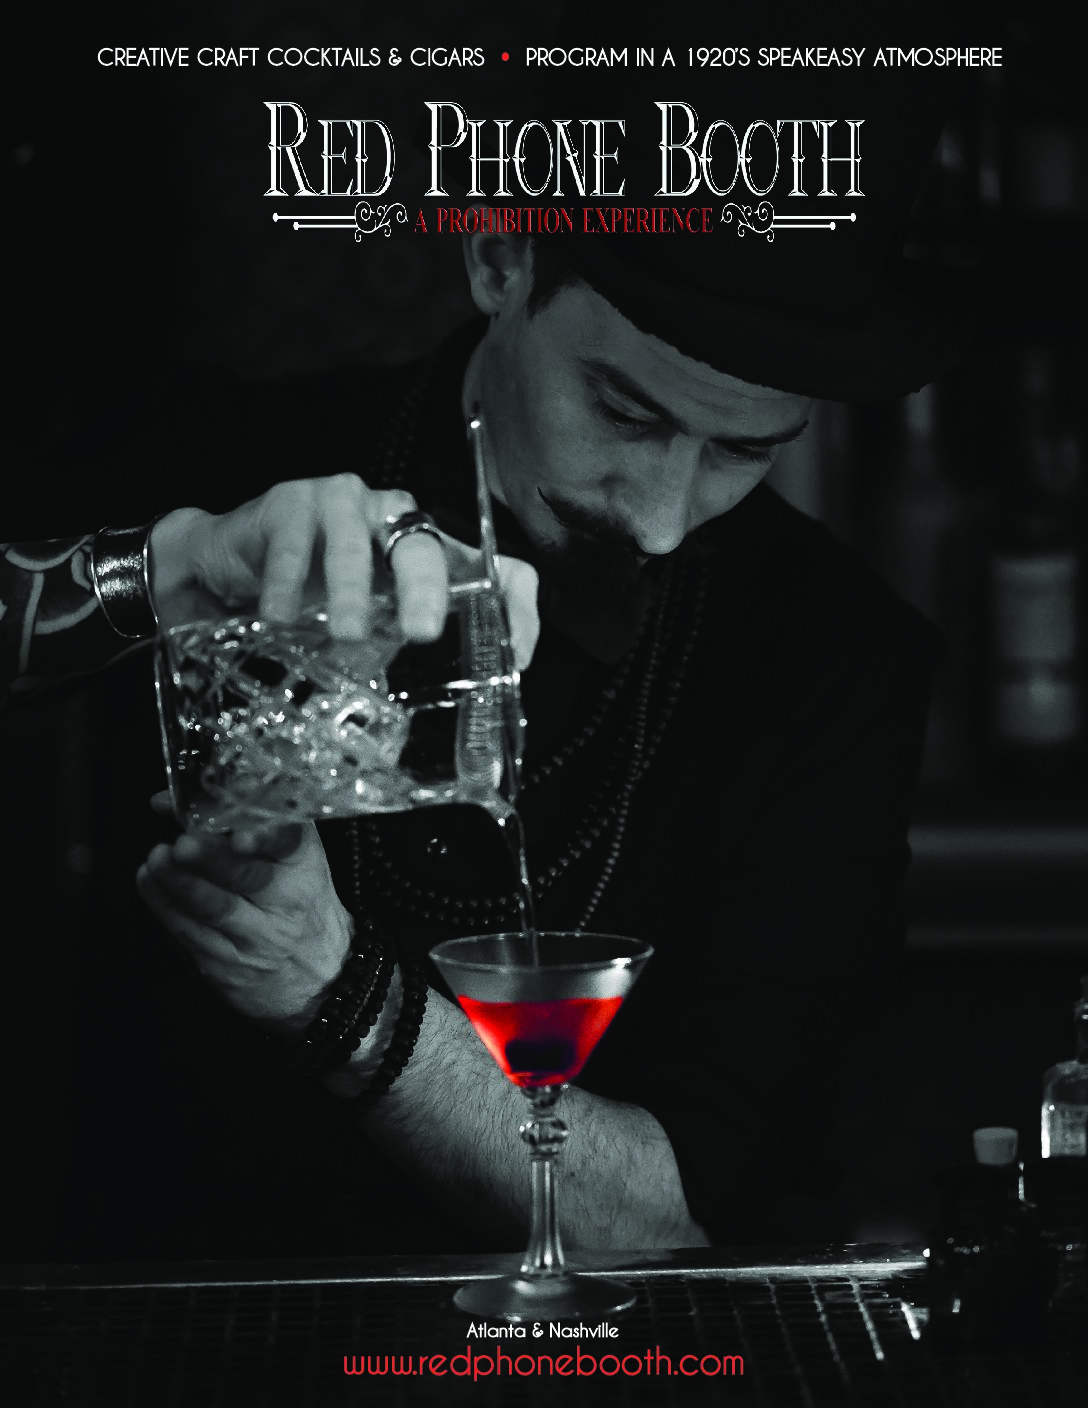 The Red Phone Booth: a Suave, Smart Speakeasy